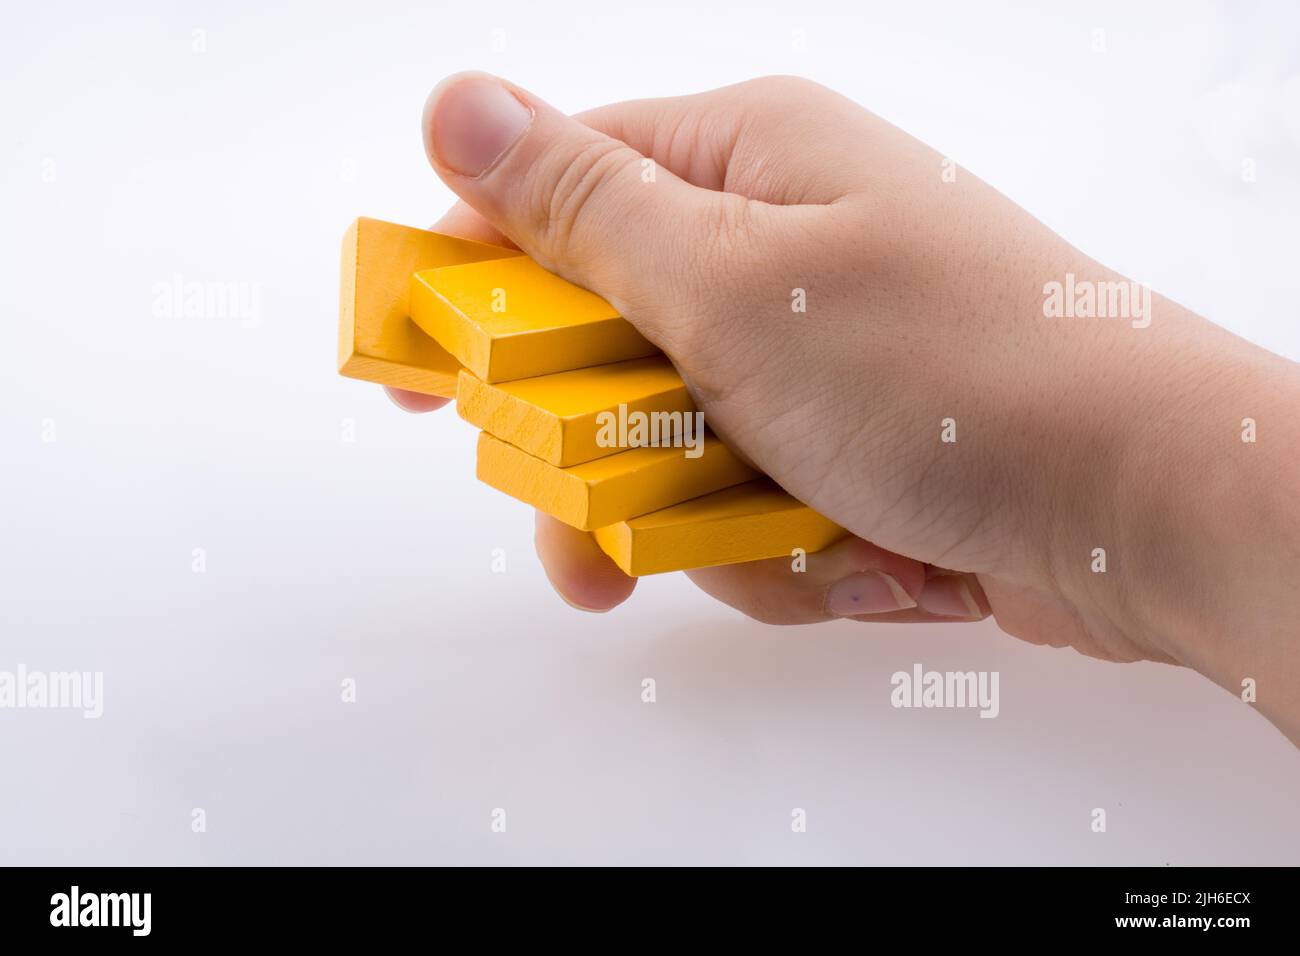 Hand holding yellow color domino pieces in hand Stock Photo